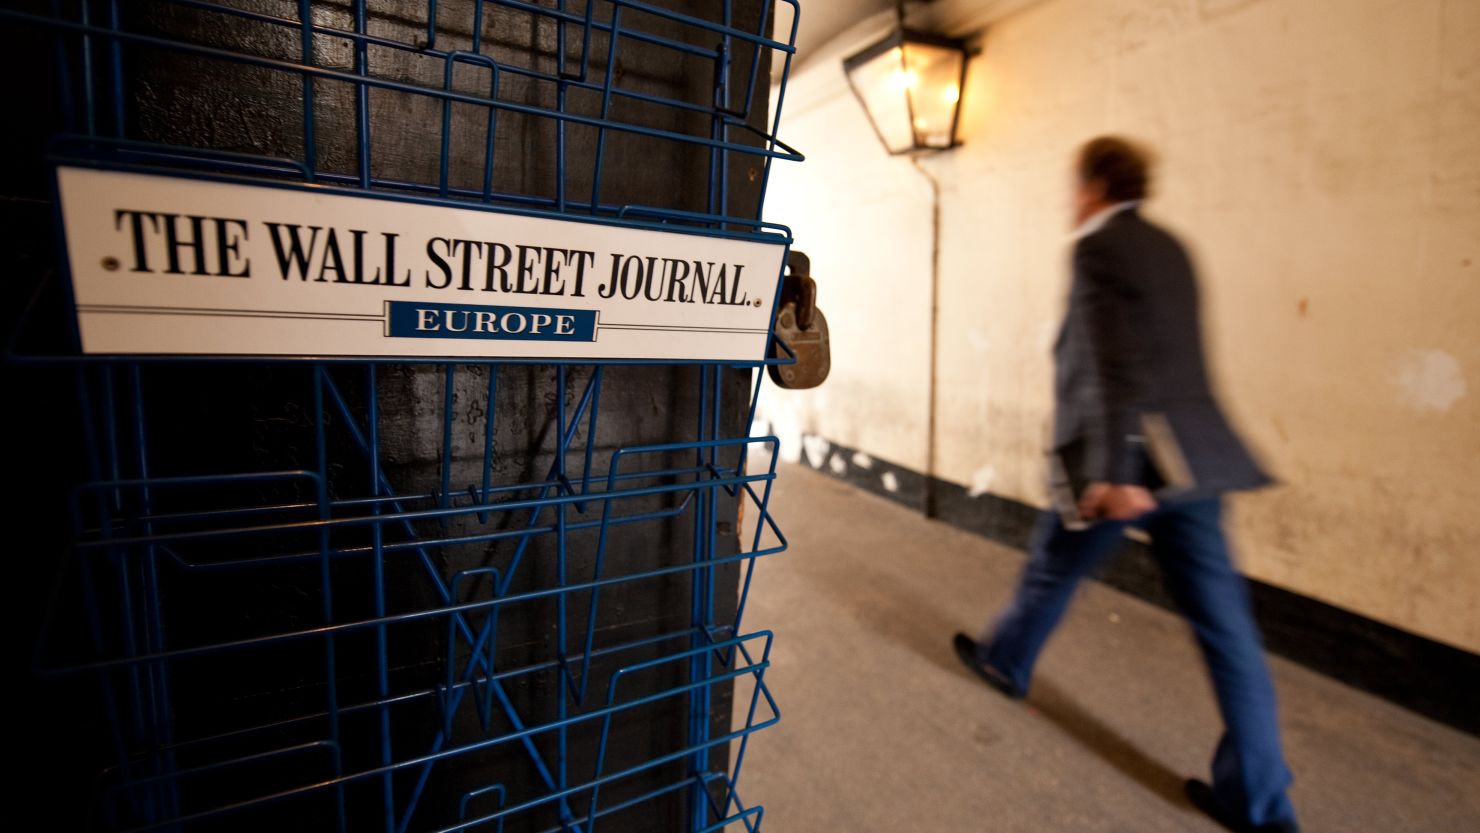 Allegations have arisen that circulation figures for the European edition of the Wall Street Journal were boosted by complex cut-price deals with a sponsor. 